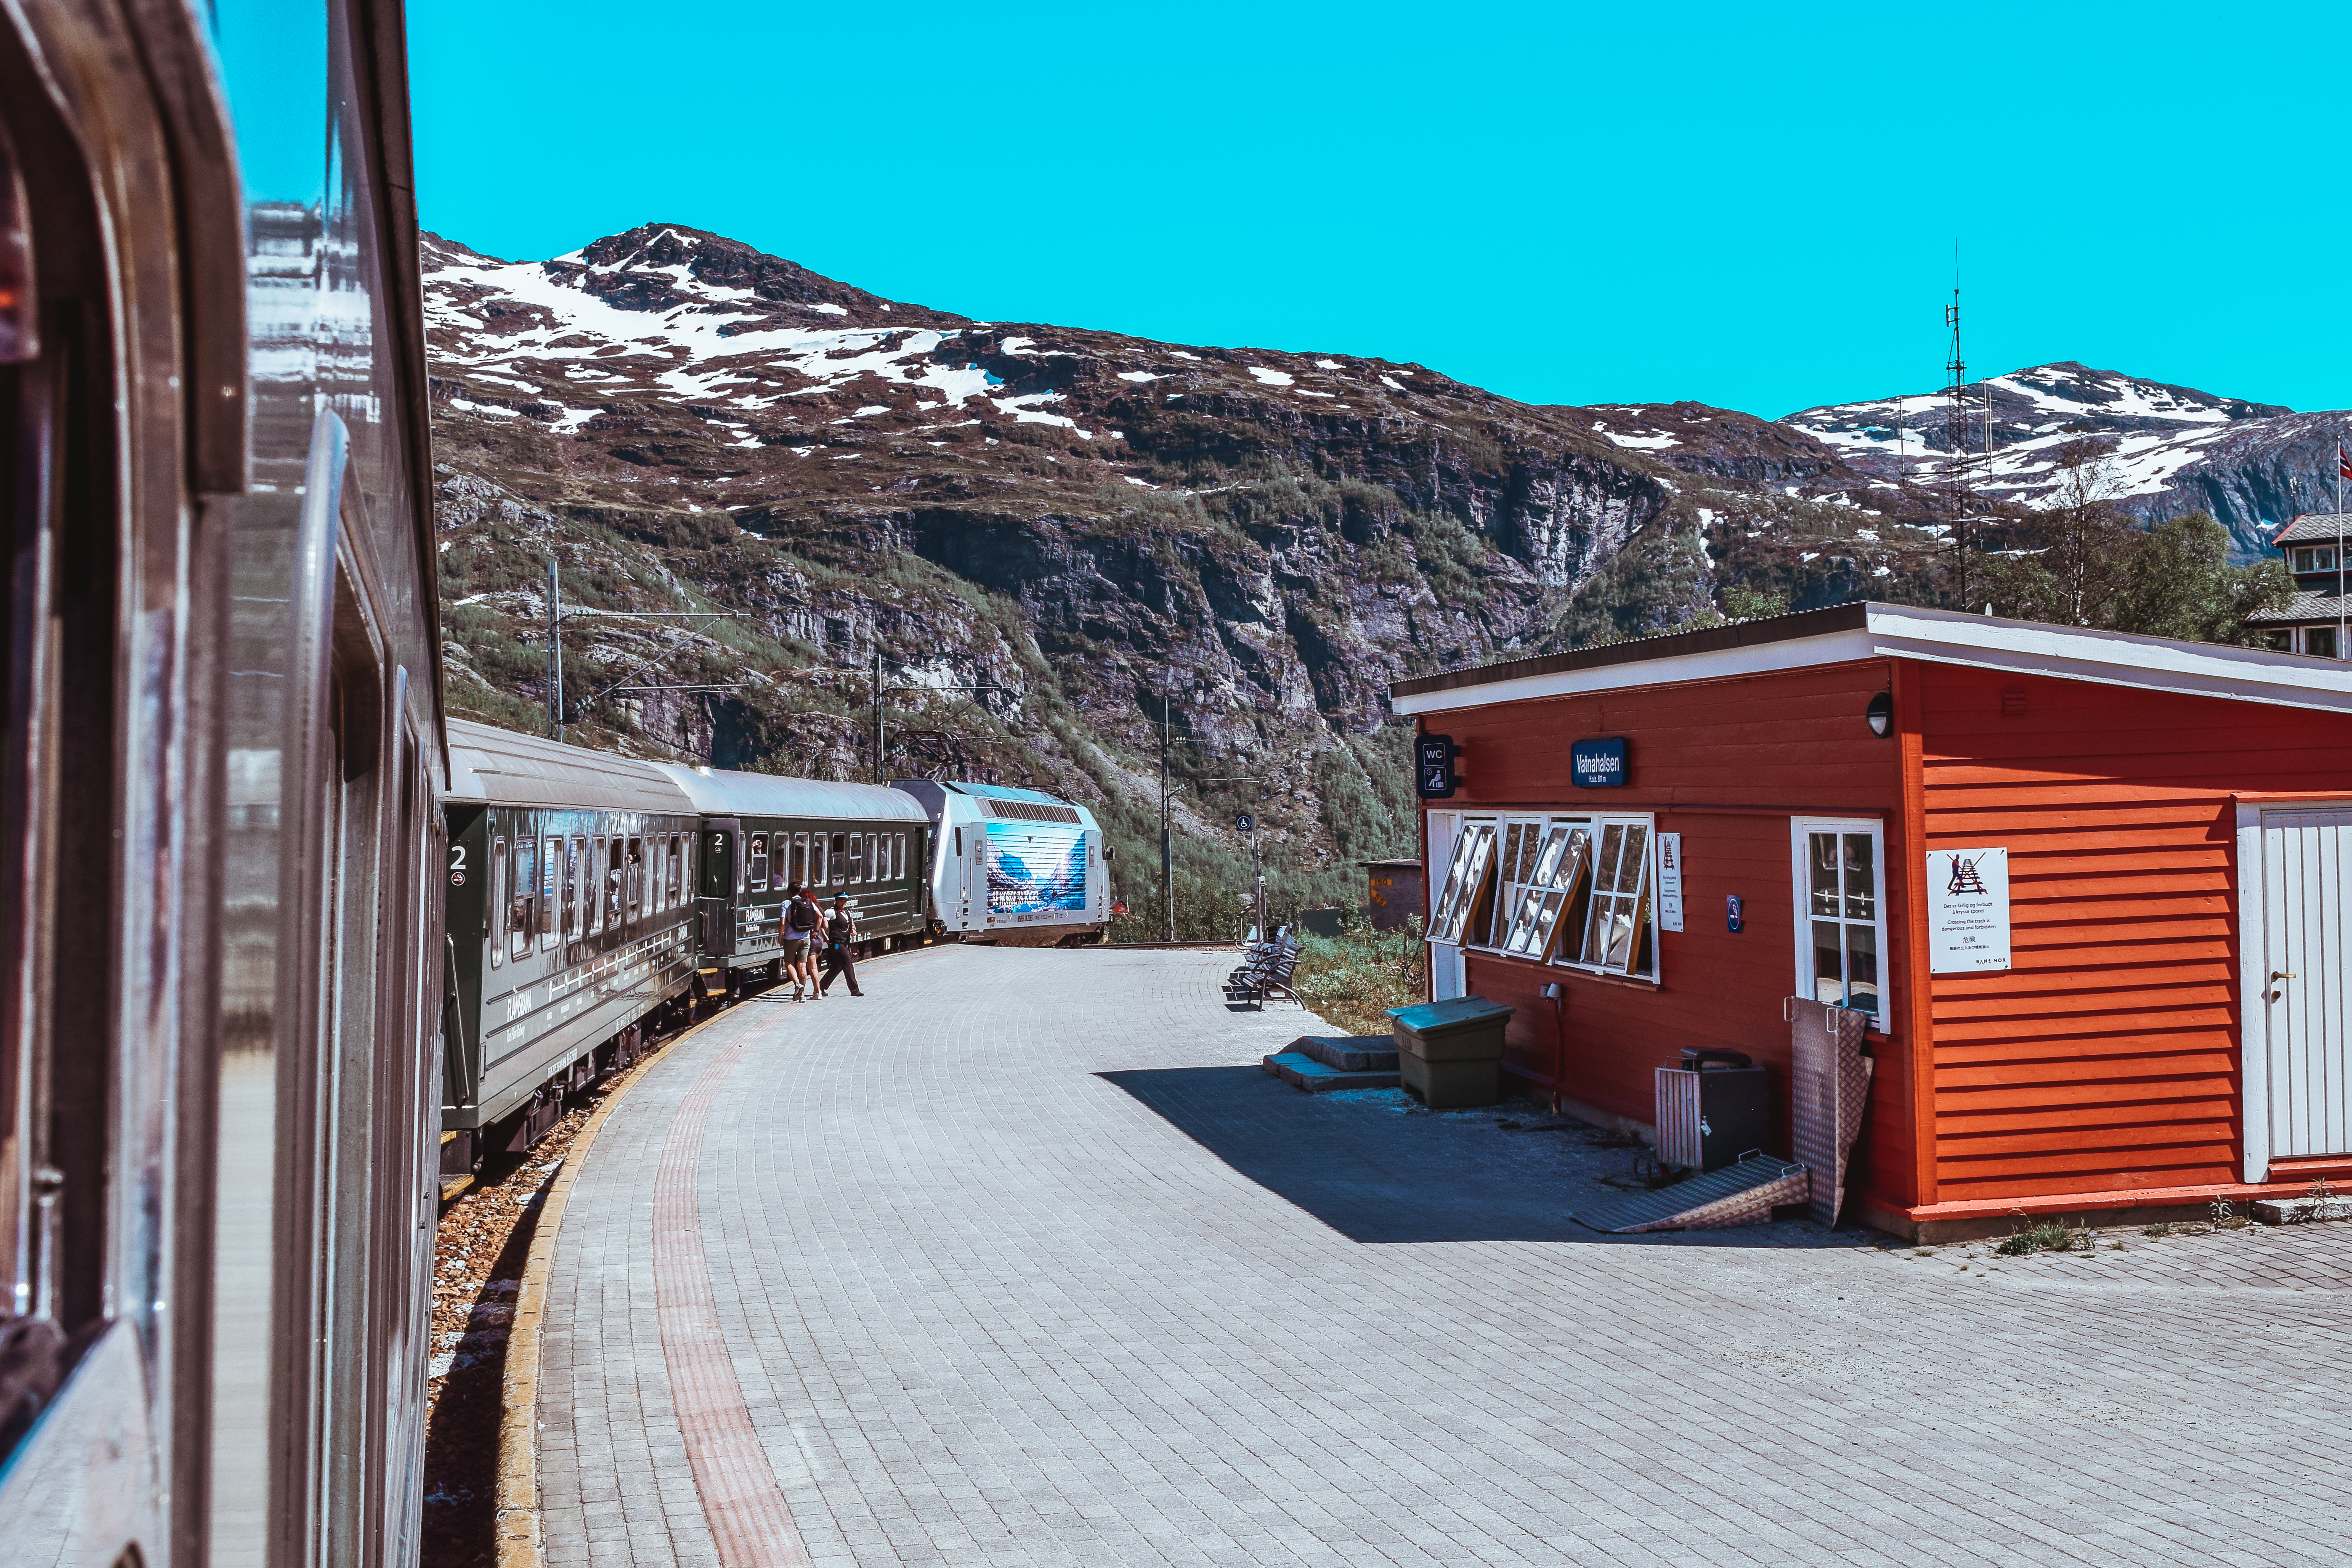 How To Travel In Norway- Aurland to Flam Ferry 29|2 Aurland where to stay in Flam Aurland travel blog svadore -1 4 Days in Norway: Oslo, Flam, Aurland, and Bergen